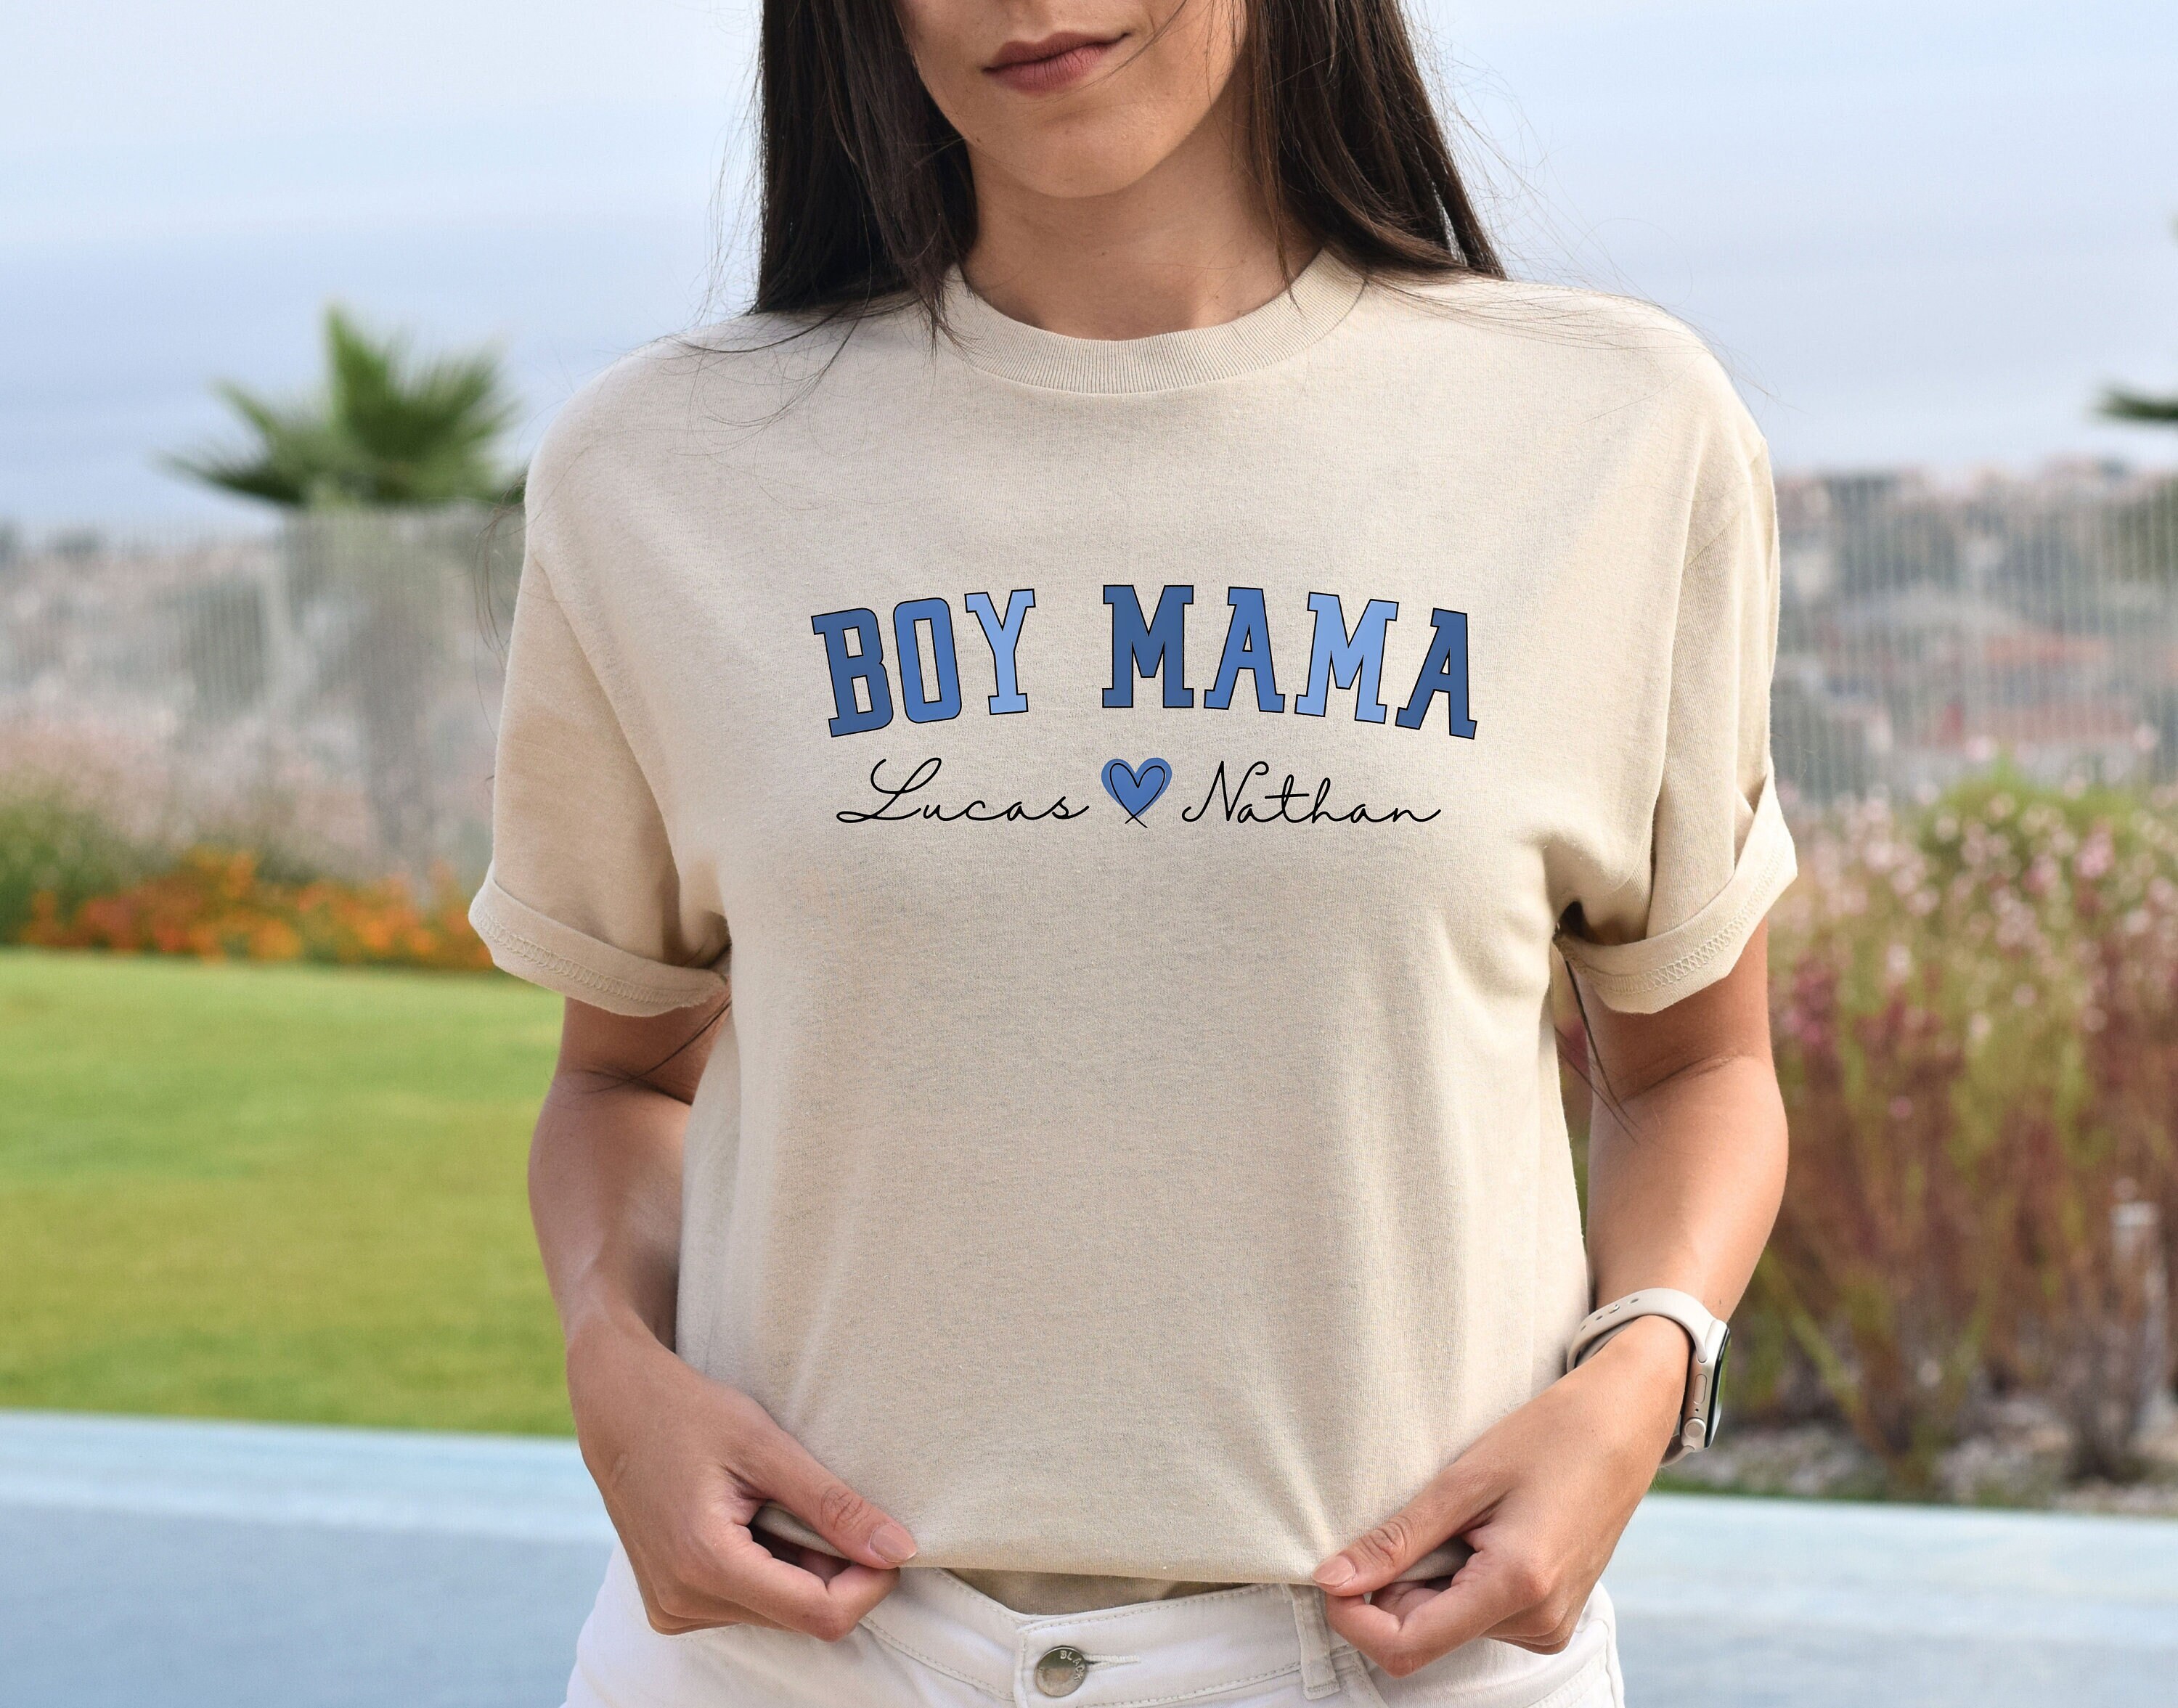 Custom Boy Mama Shirt With Kids Names For Mother’s Day, Personalized Mother’s Day Gift For Mom, Mom Birthday Gift Pregnancy Announcement Tee